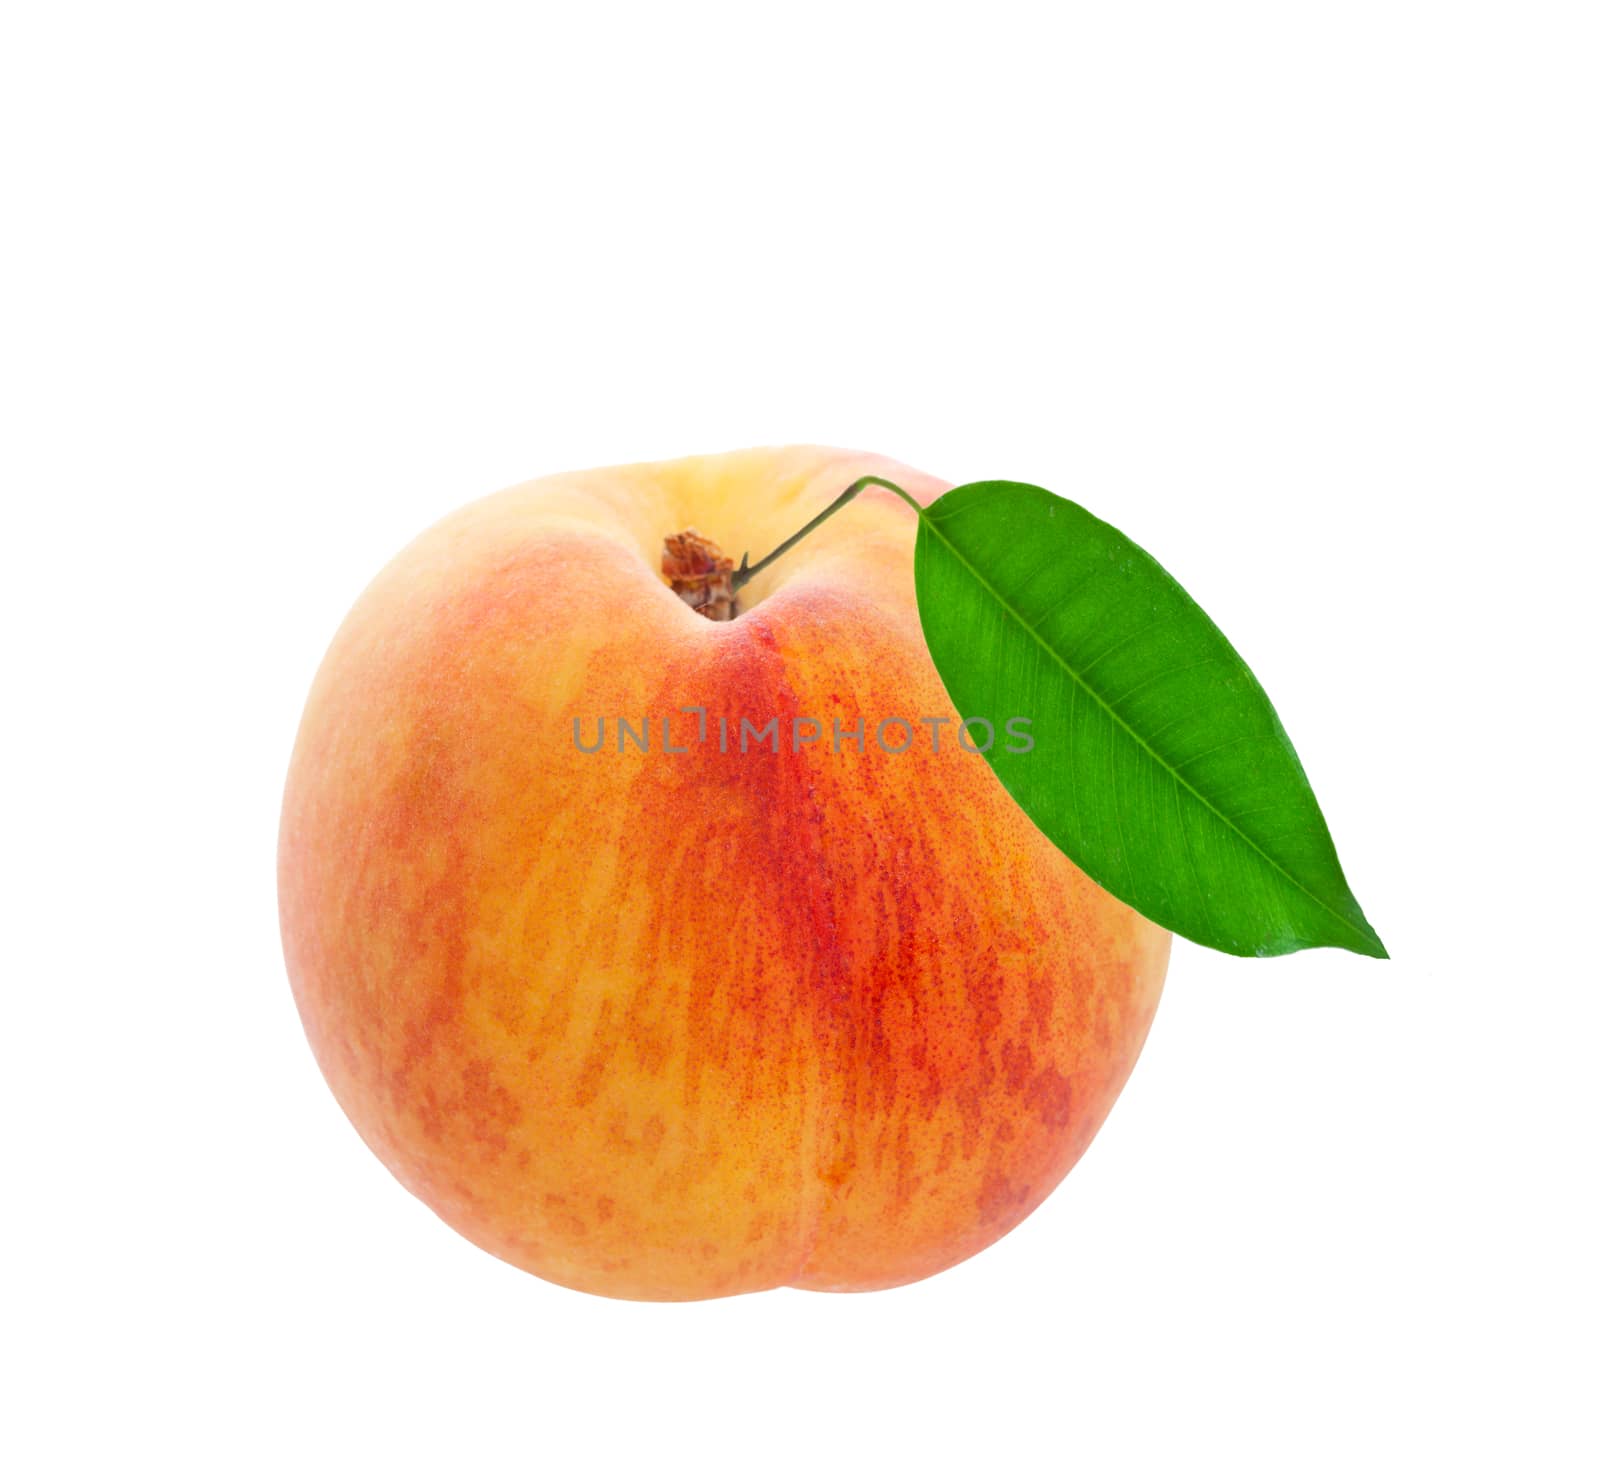 A freshly picked peach with leaf still attached.  Shot on white background.  